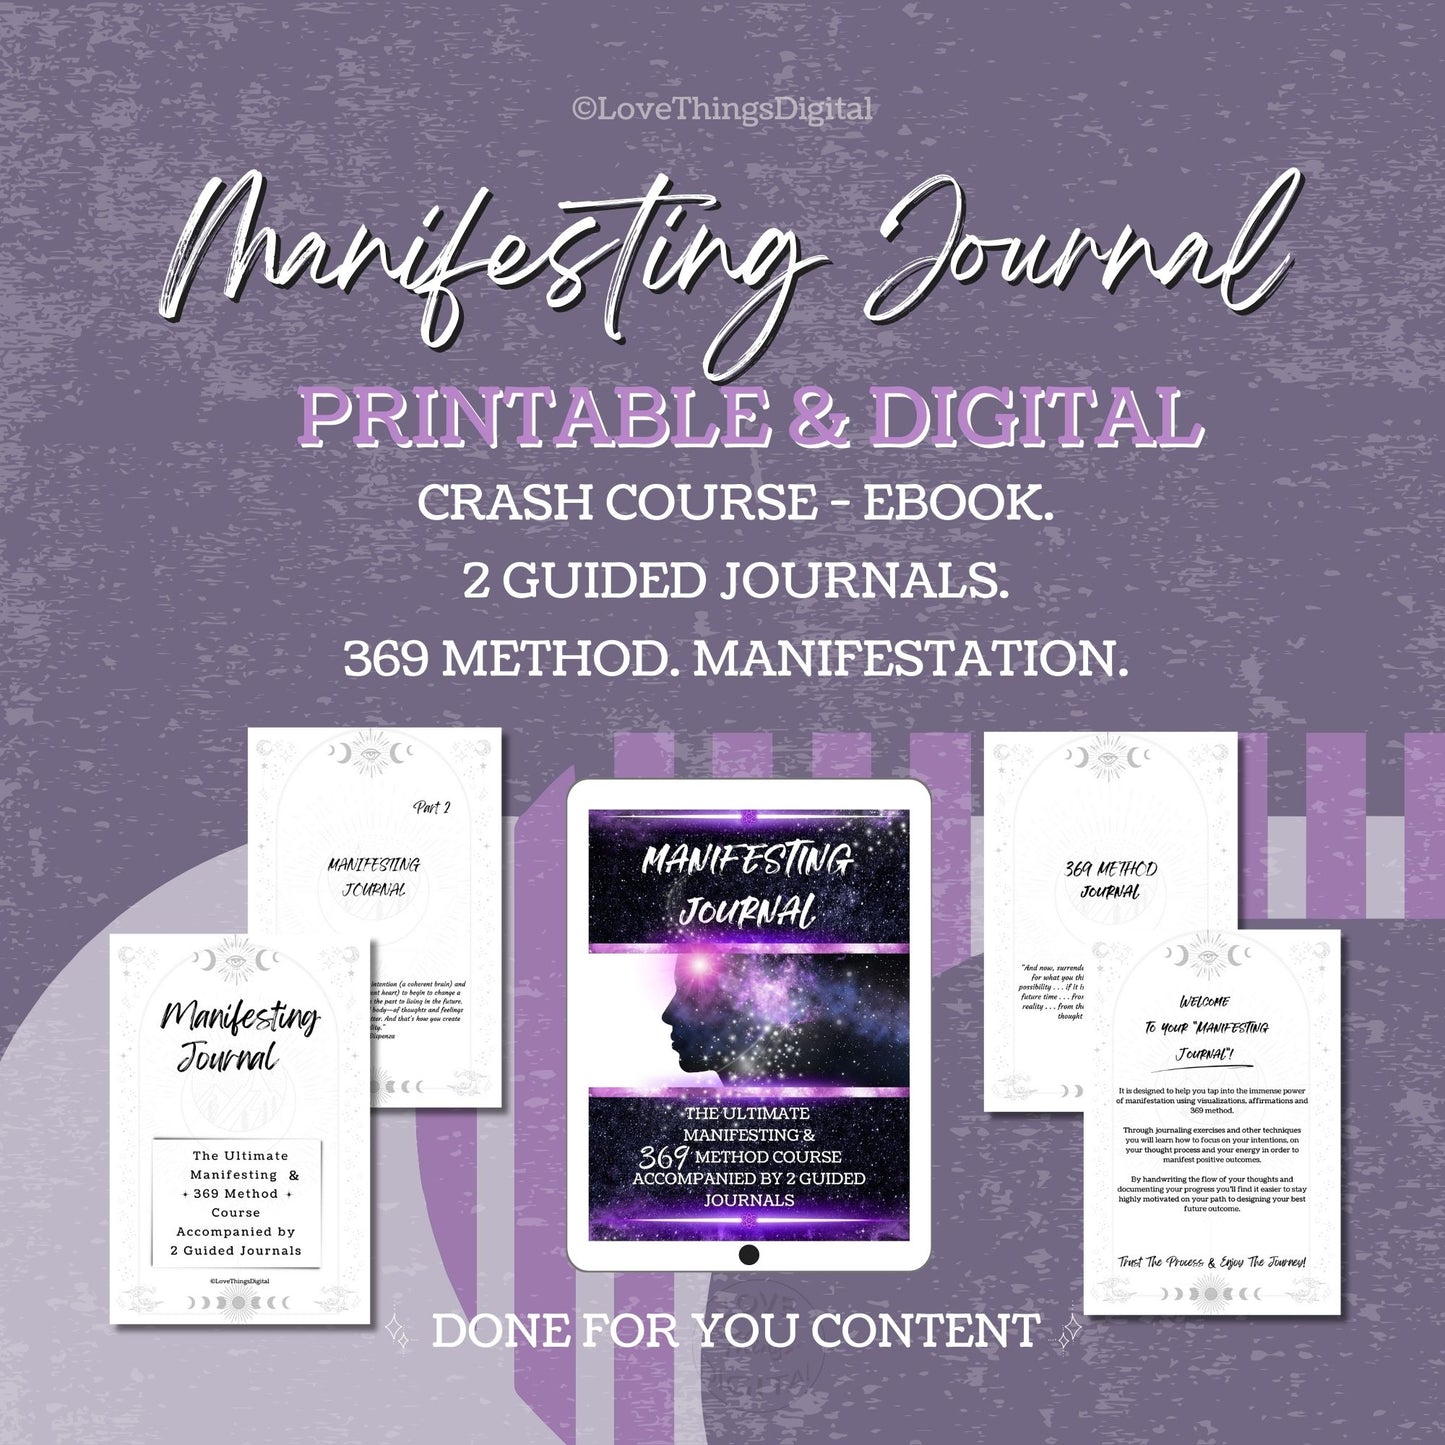 The Ultimate Manifestation And 369 Method Course With 2 Guided Journals